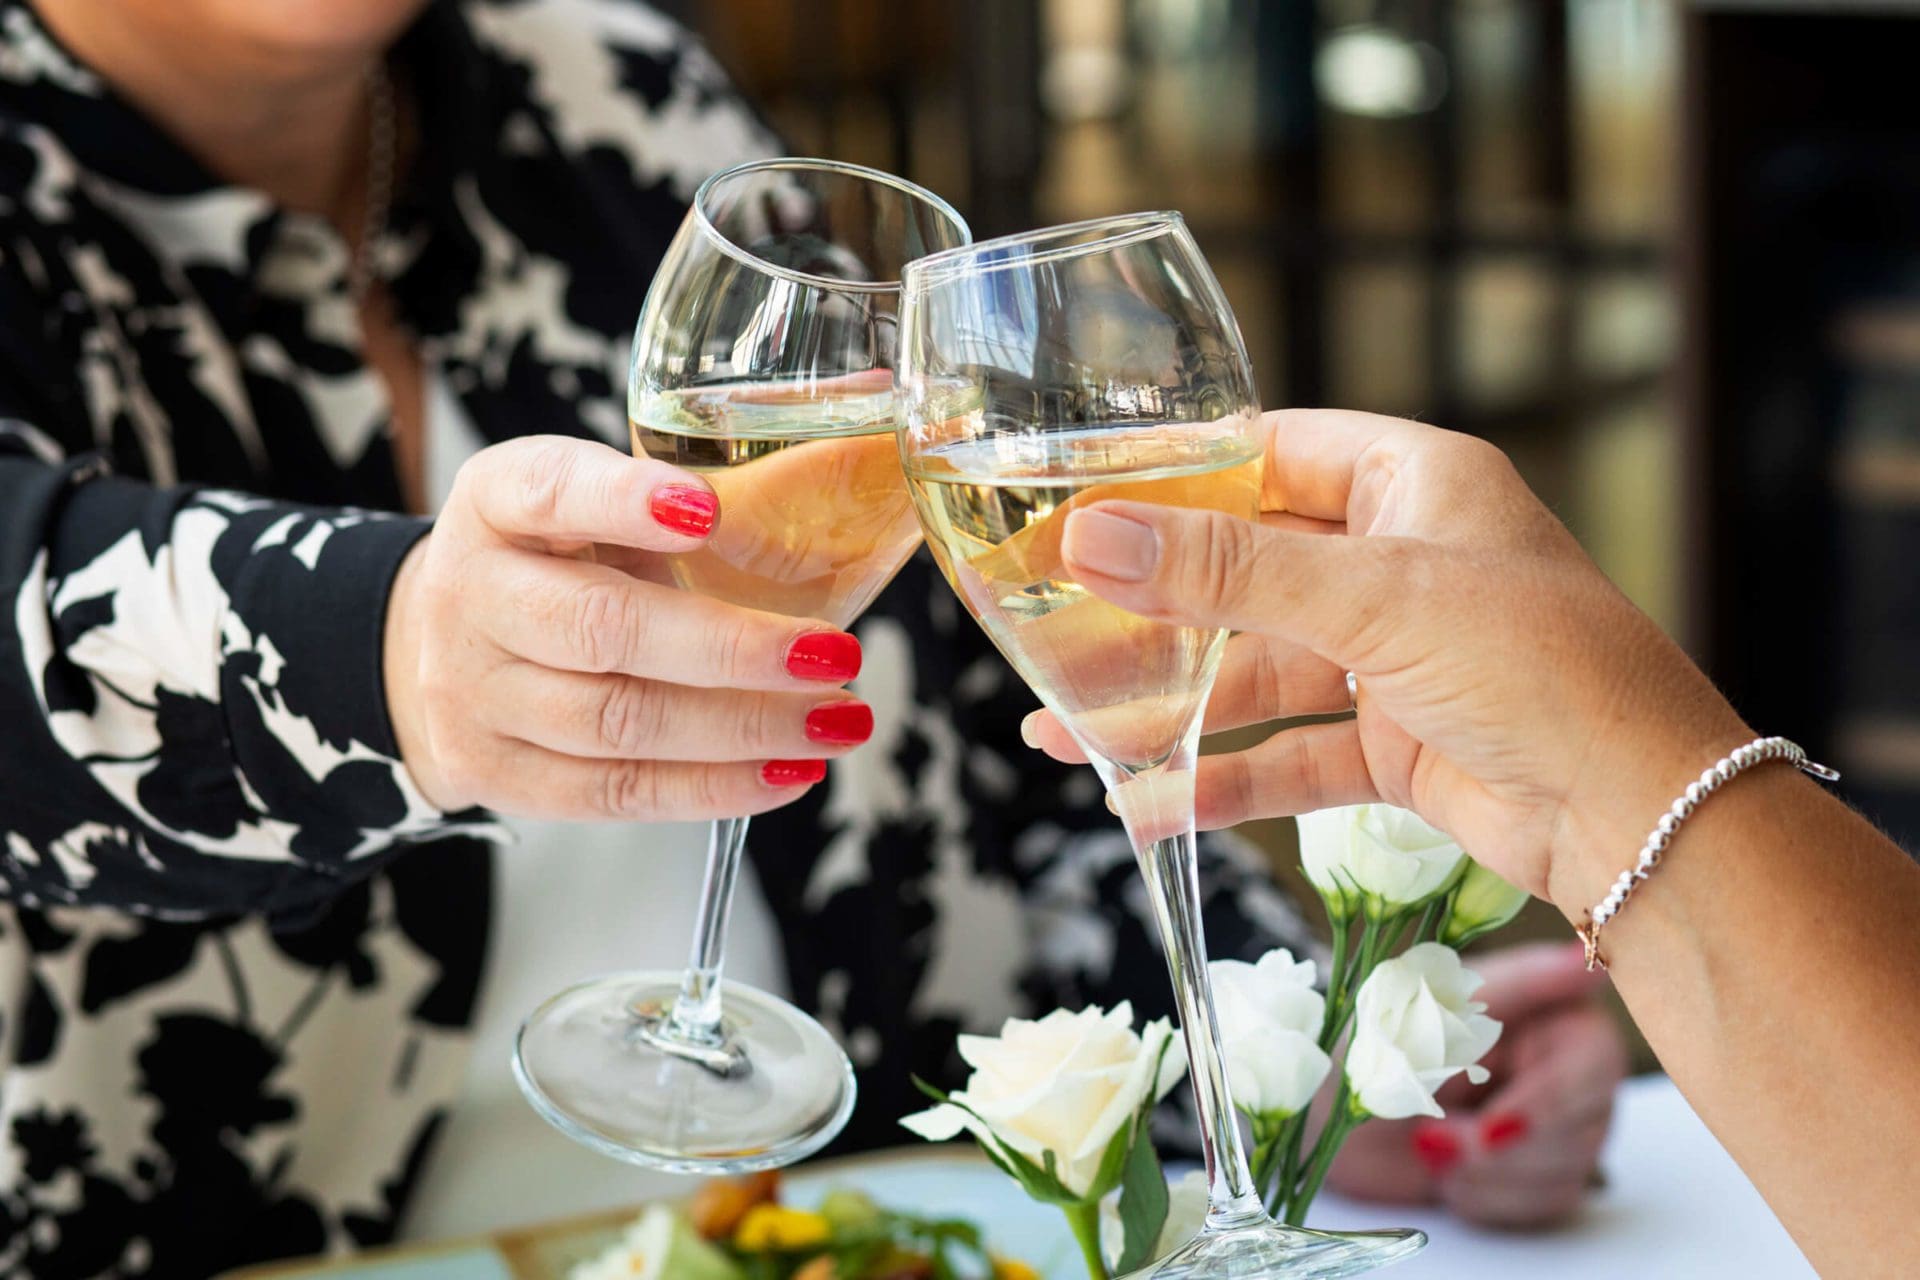 Image of 2 people toasting with wine